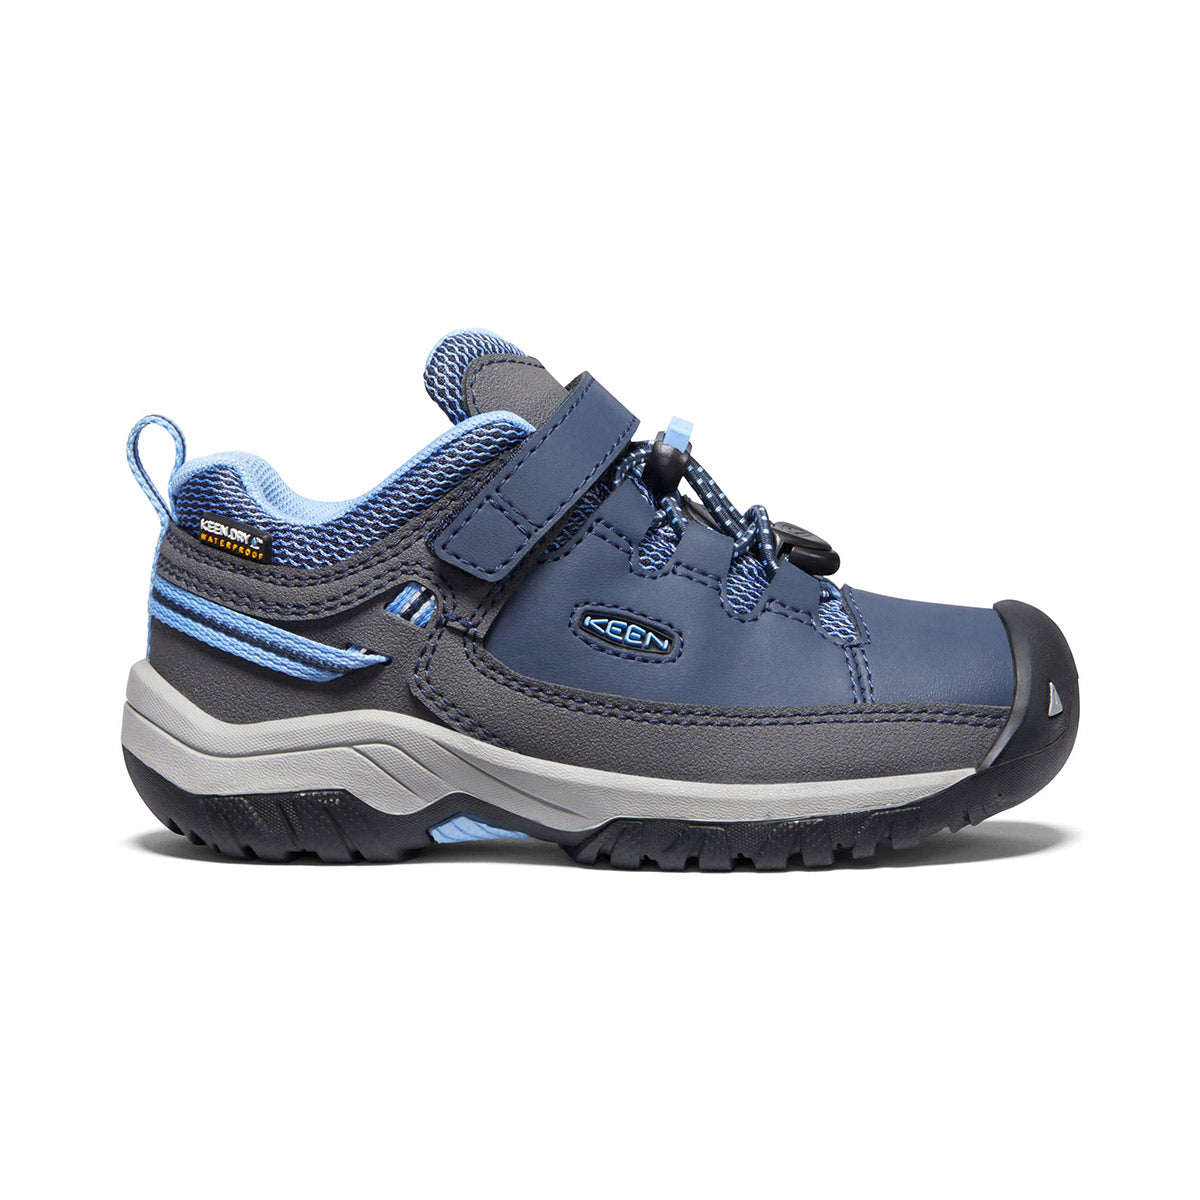 A child's blue and gray waterproof leather Keen Targhee Low kid's shoe against a white background.